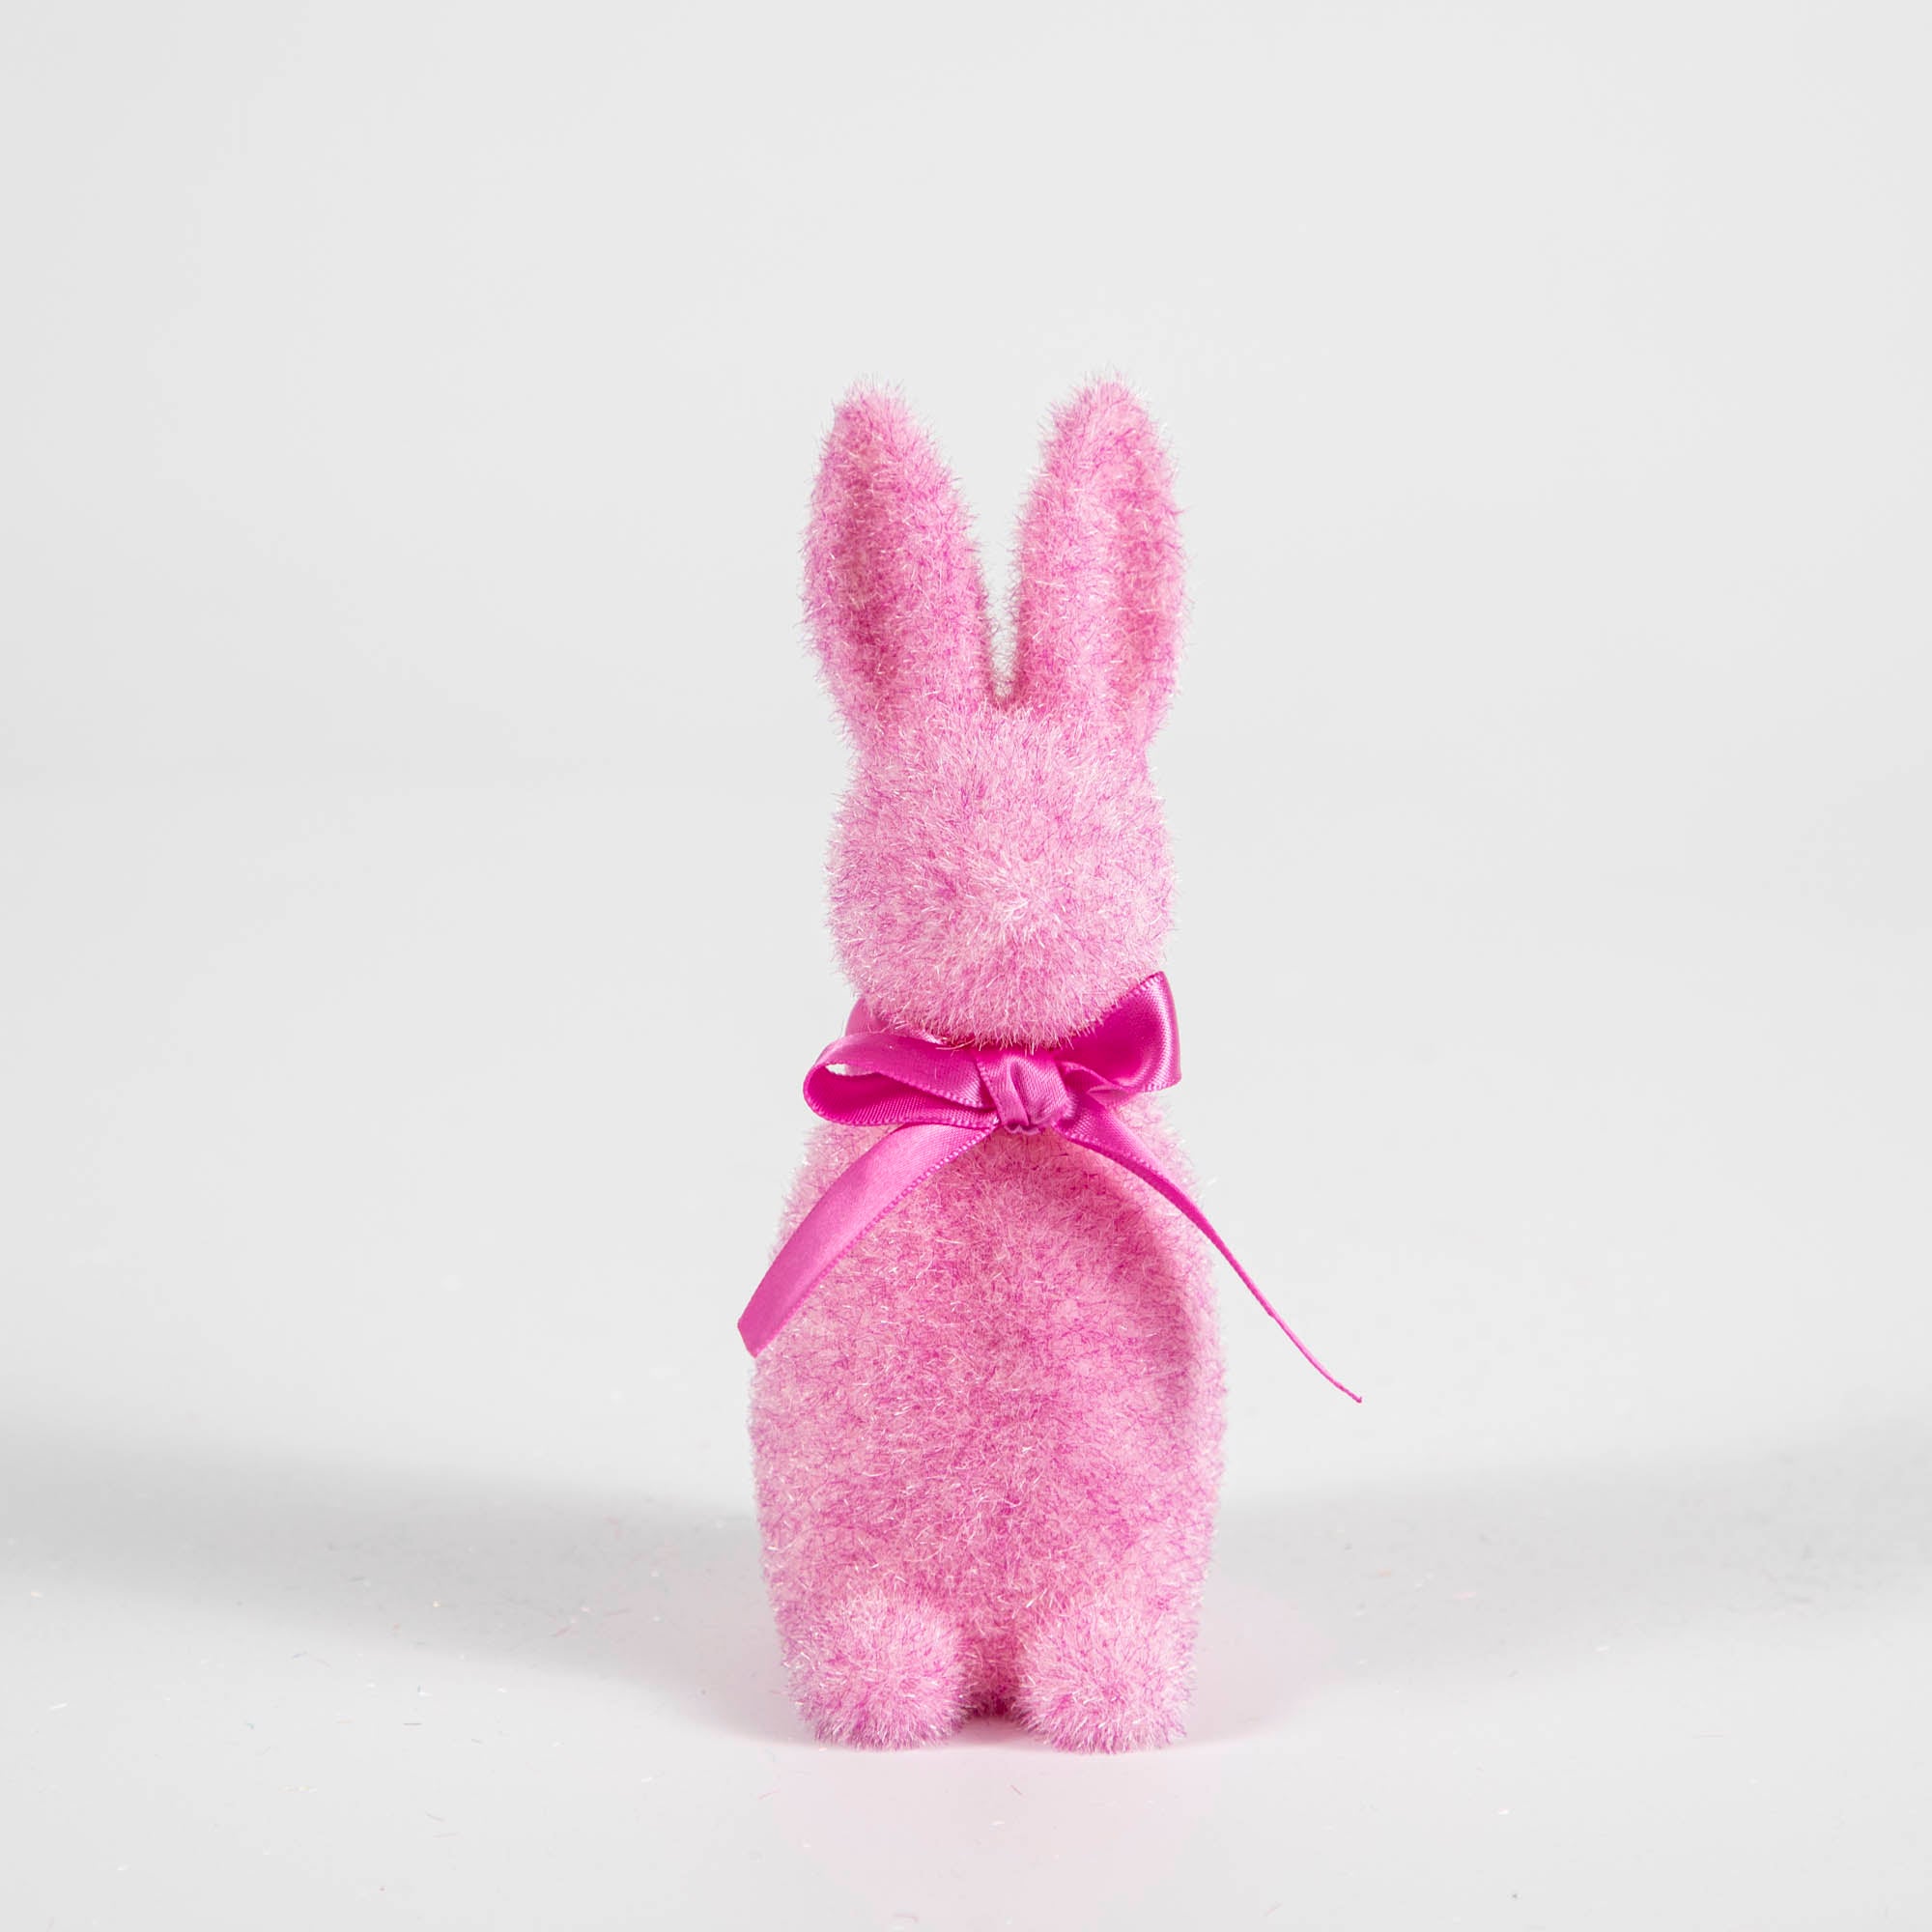 A Small Flocked Pastel Button Nose Bunny with a pink bow, perfect for holiday Easter egg hunts. (Product Name: Small Flocked Pastel Button Nose Bunny; Brand Name: Glitterville)